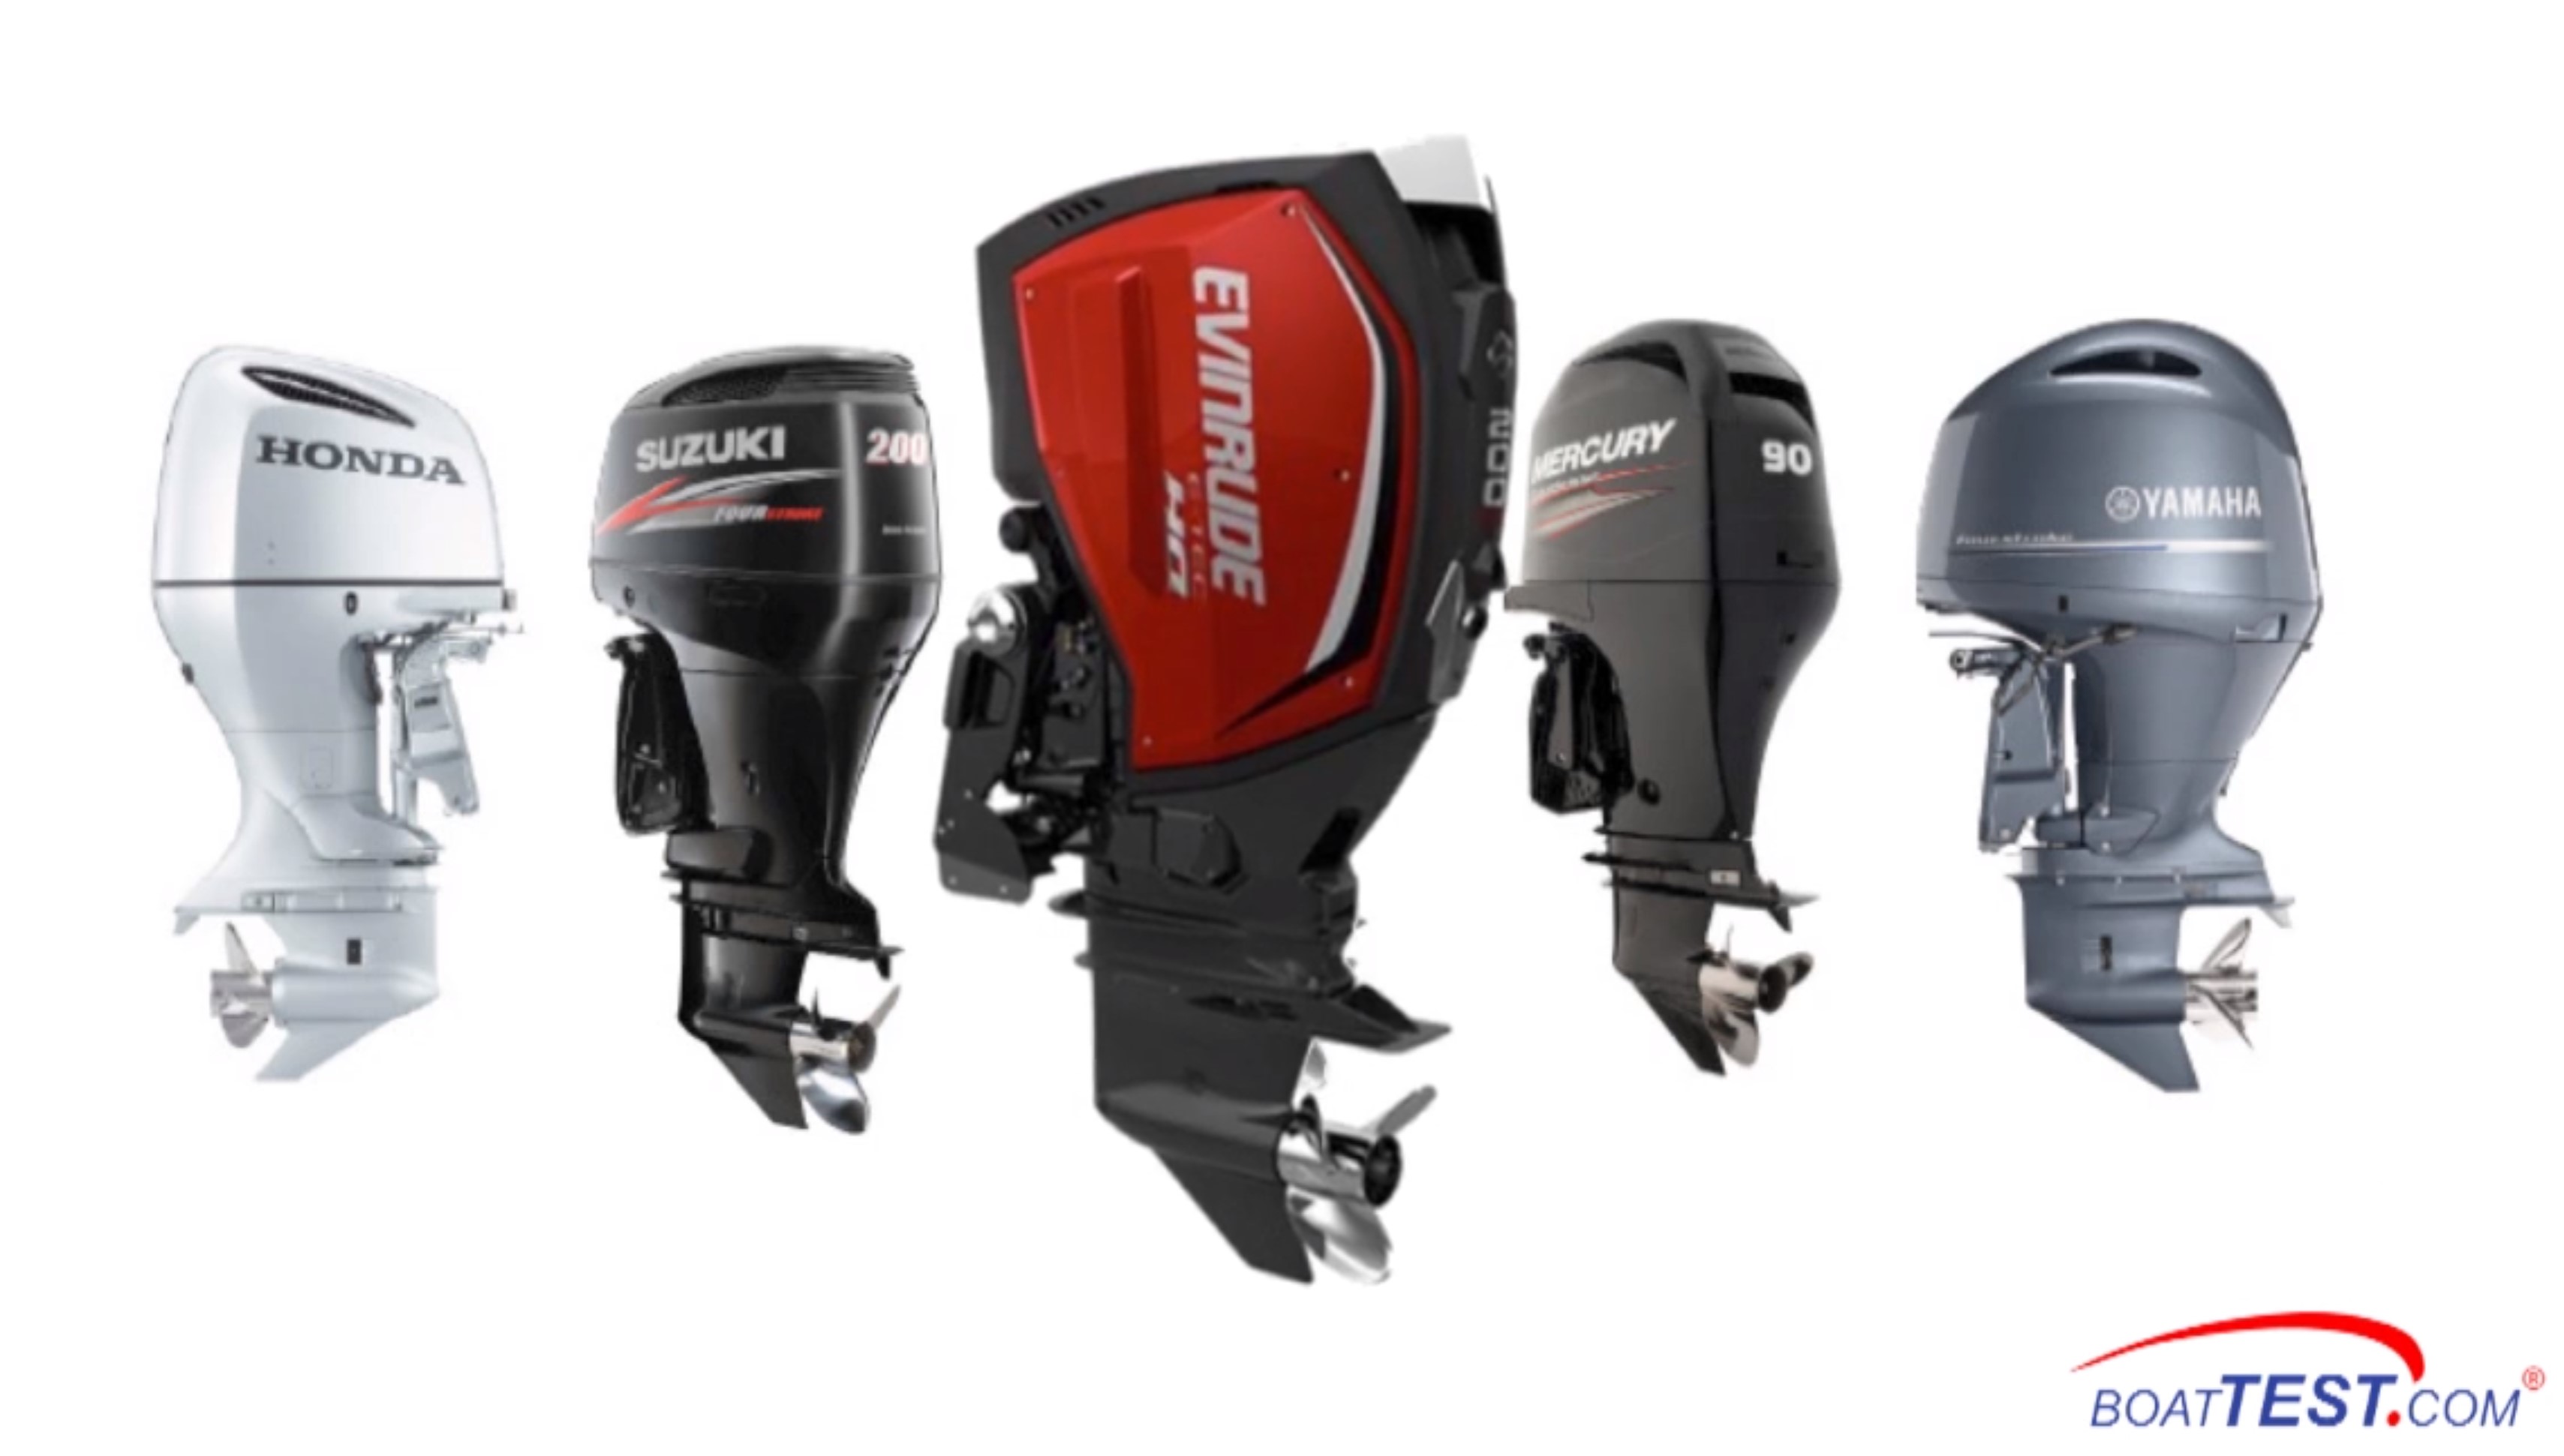 Evinrude Clean Technology